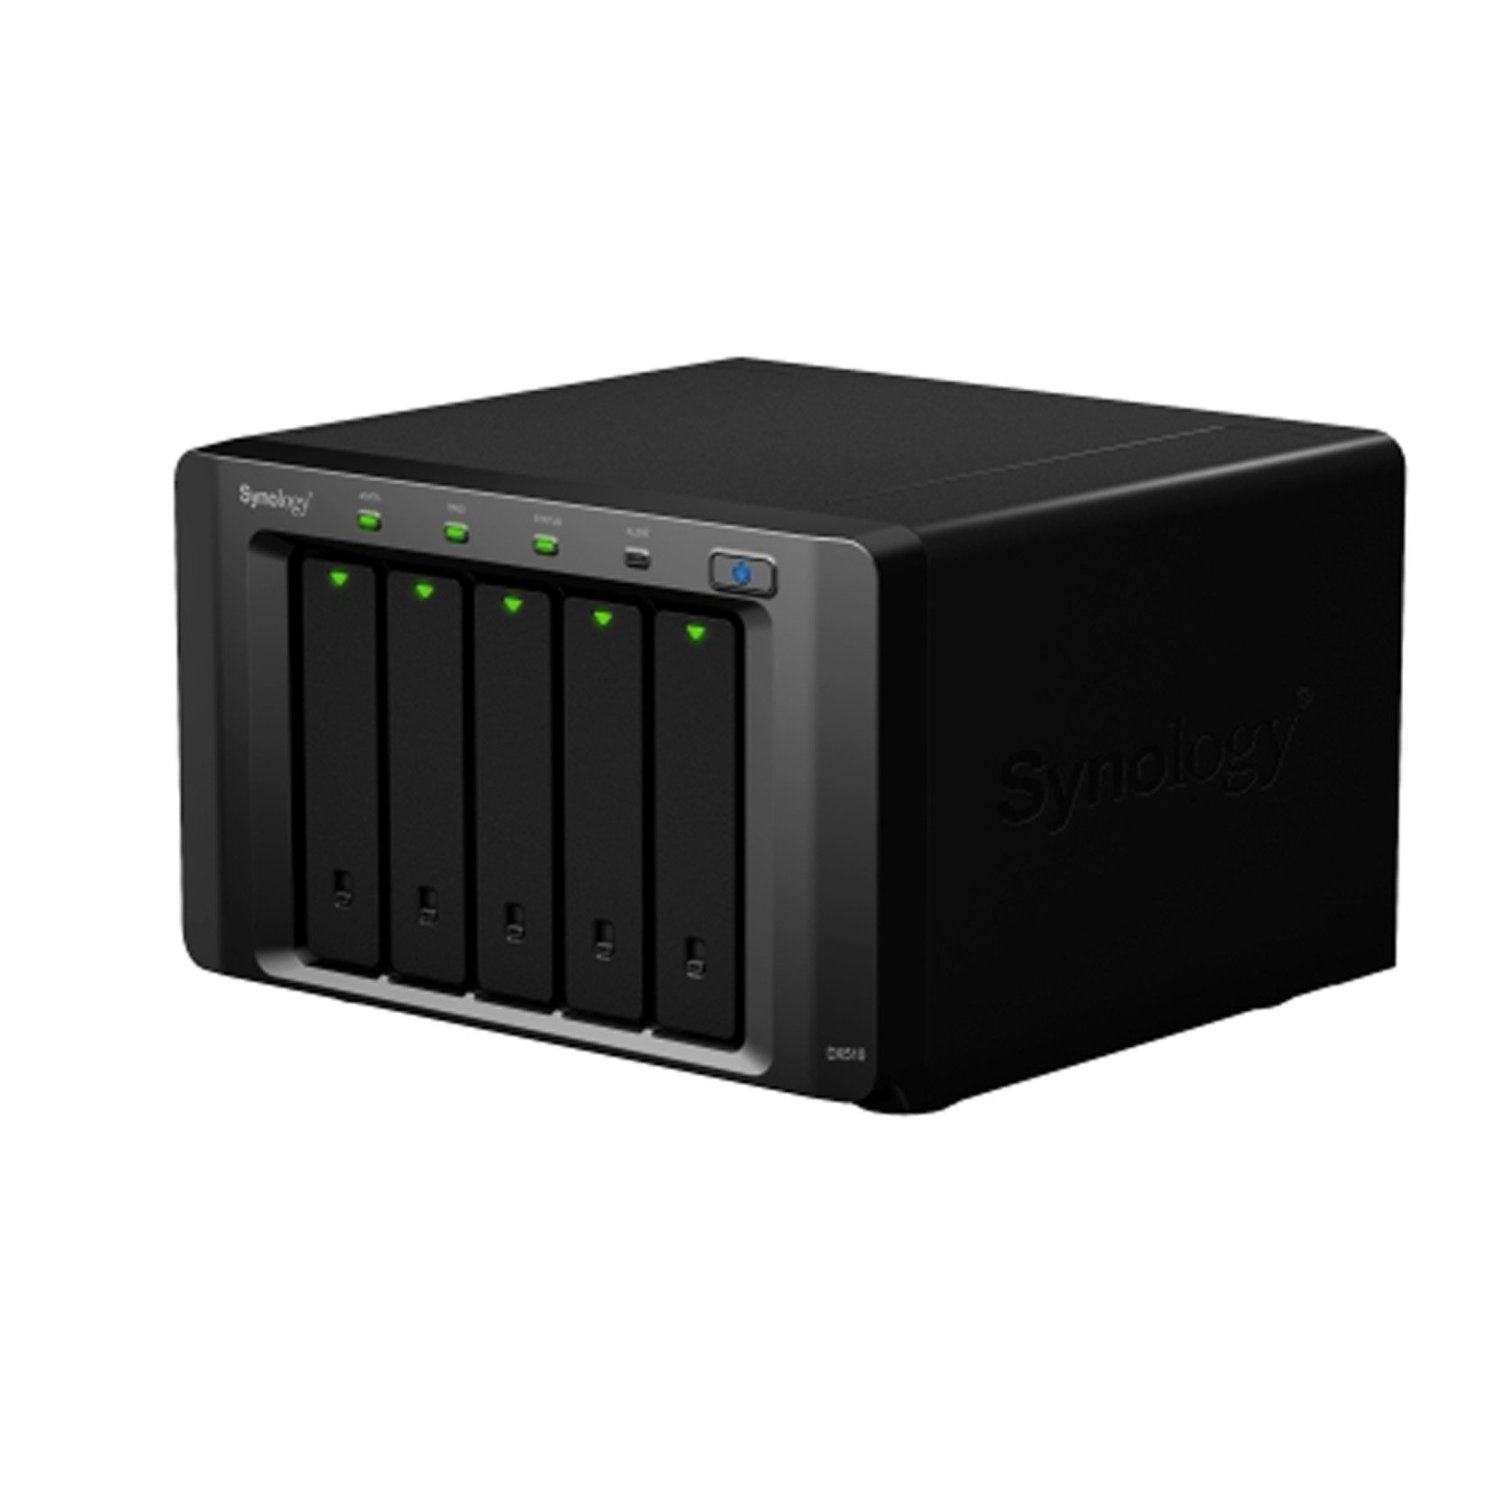 http://thetechjournal.com/wp-content/uploads/images/1201/1326213814-synology-5bay-plugnuse-expansion-unit-5.jpg